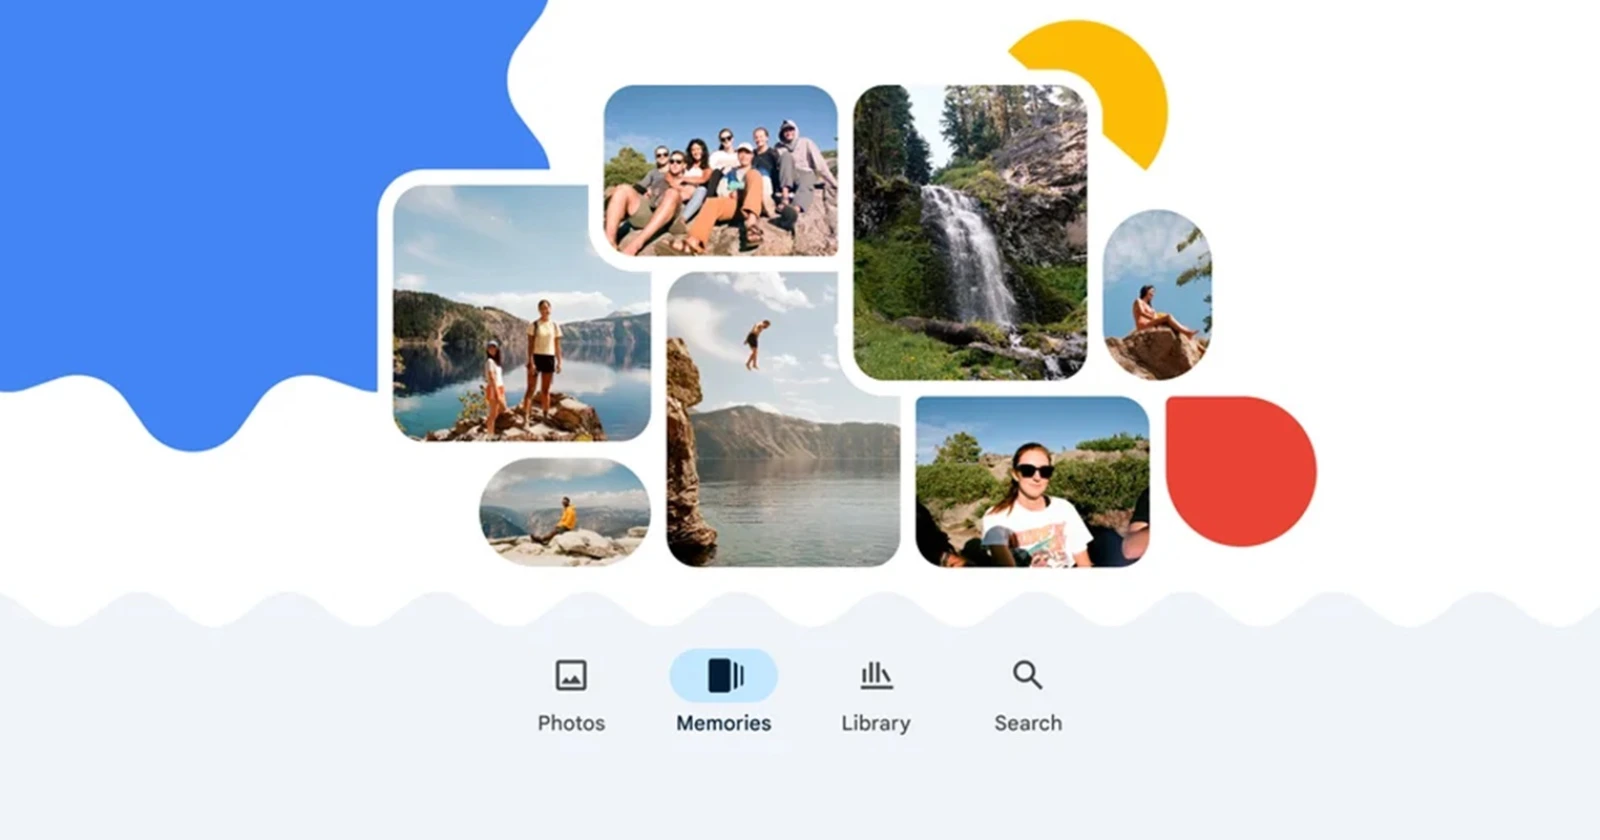 You'll now have more control over 'Memories' in Google Photos thanks to Activity-based personalization